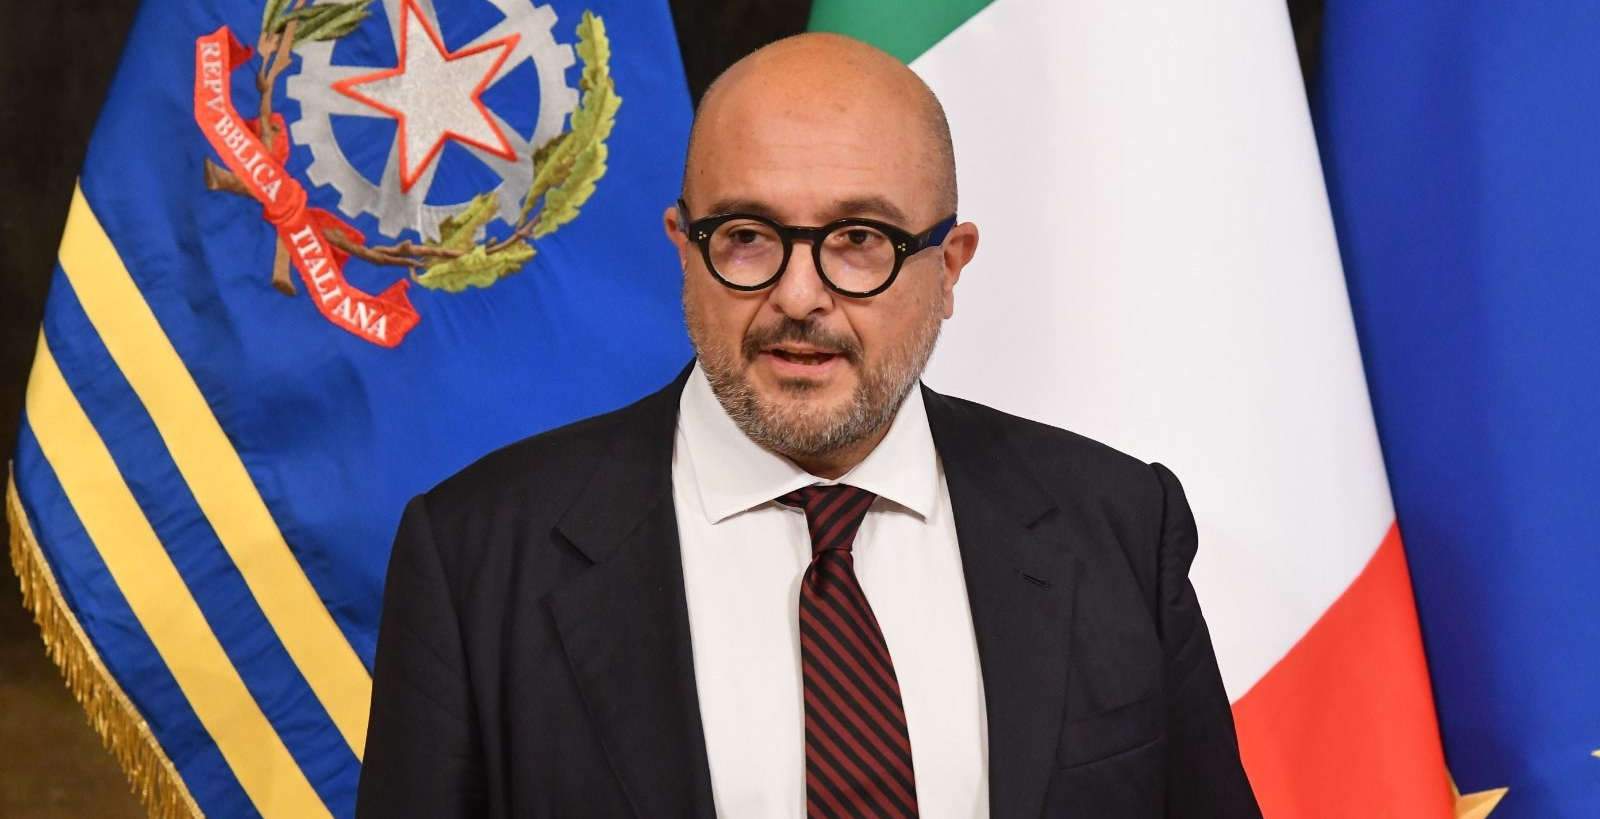 Minister Sangiuliano tries to abolish cancel culture by decree